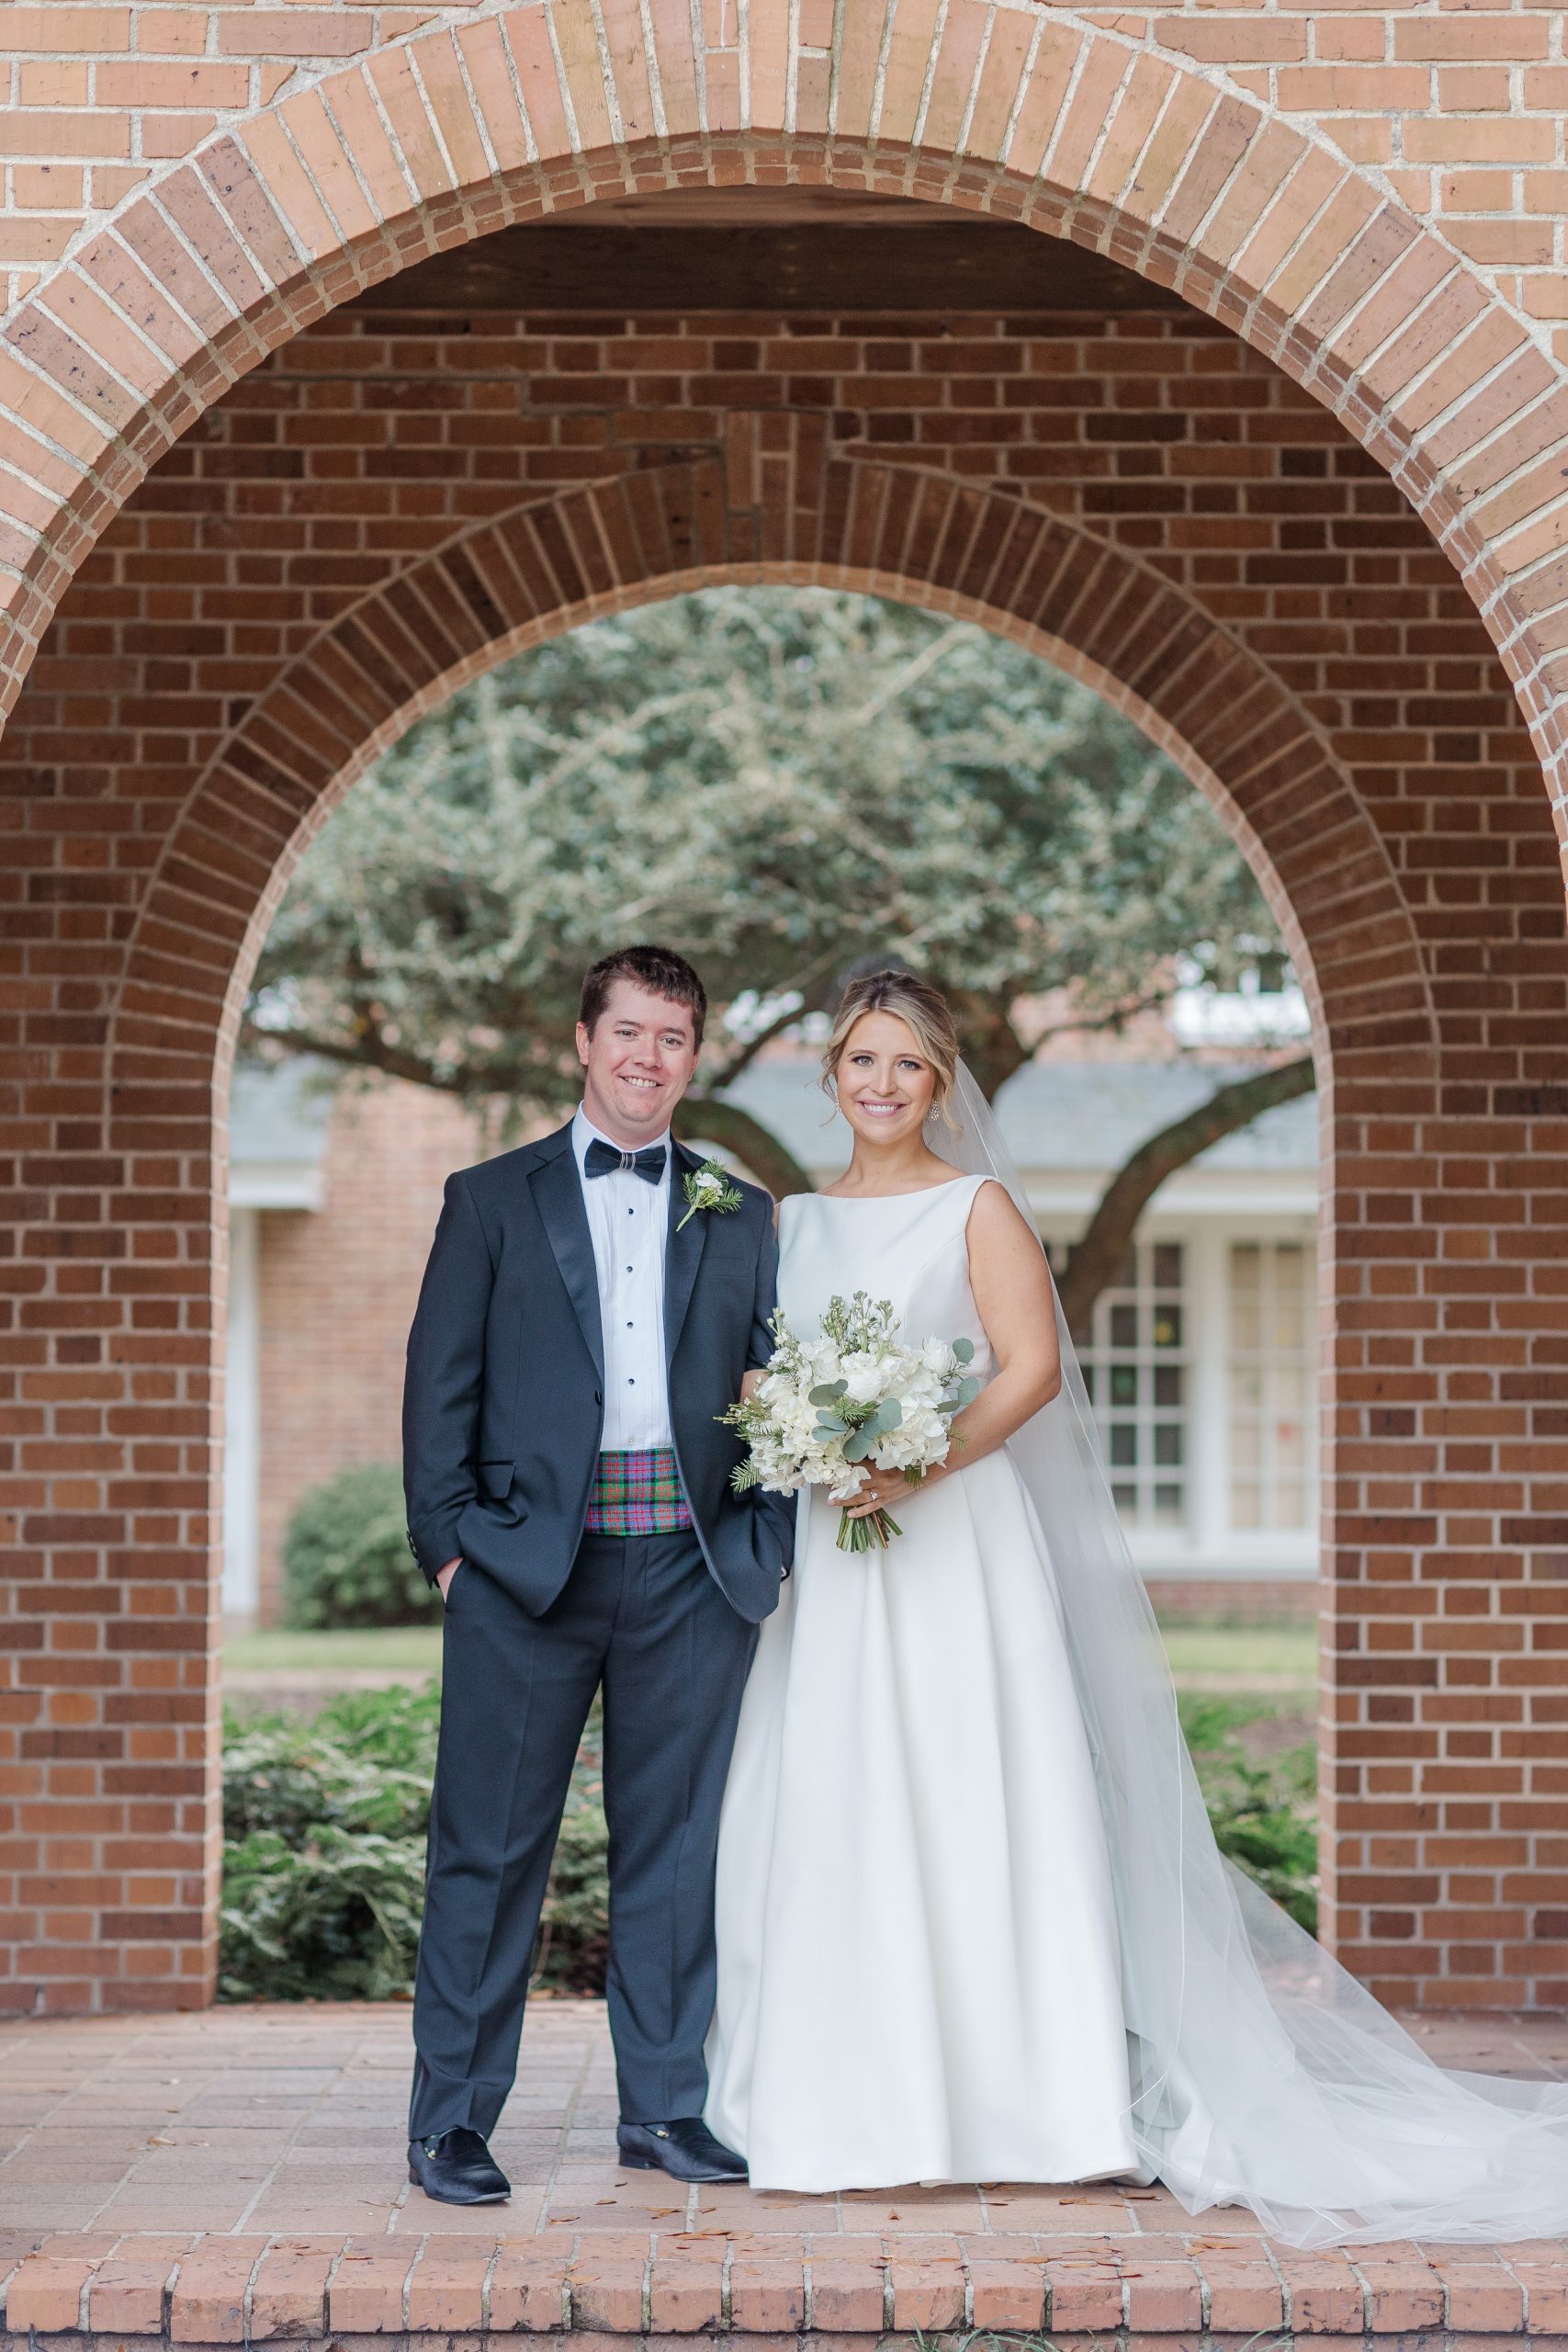  Cecilia McDonald and Ben Vondenbrink met at Clemson, where both were studying engineering, and became engaged amid family and friends during a memorable football weekend. They were married at Eastminster Presbyterian Church with a reception at the Columbia Museum of Art. Ben wore a custom needlepoint McDonald plaid cummerbund made by Cecilia, and Santa paid a surprise visit while Finesse Band played All I Want is You. The specialty cocktail was a “Selwyn Spritzer,” named for their dog. Stee Garman Photography, LLC